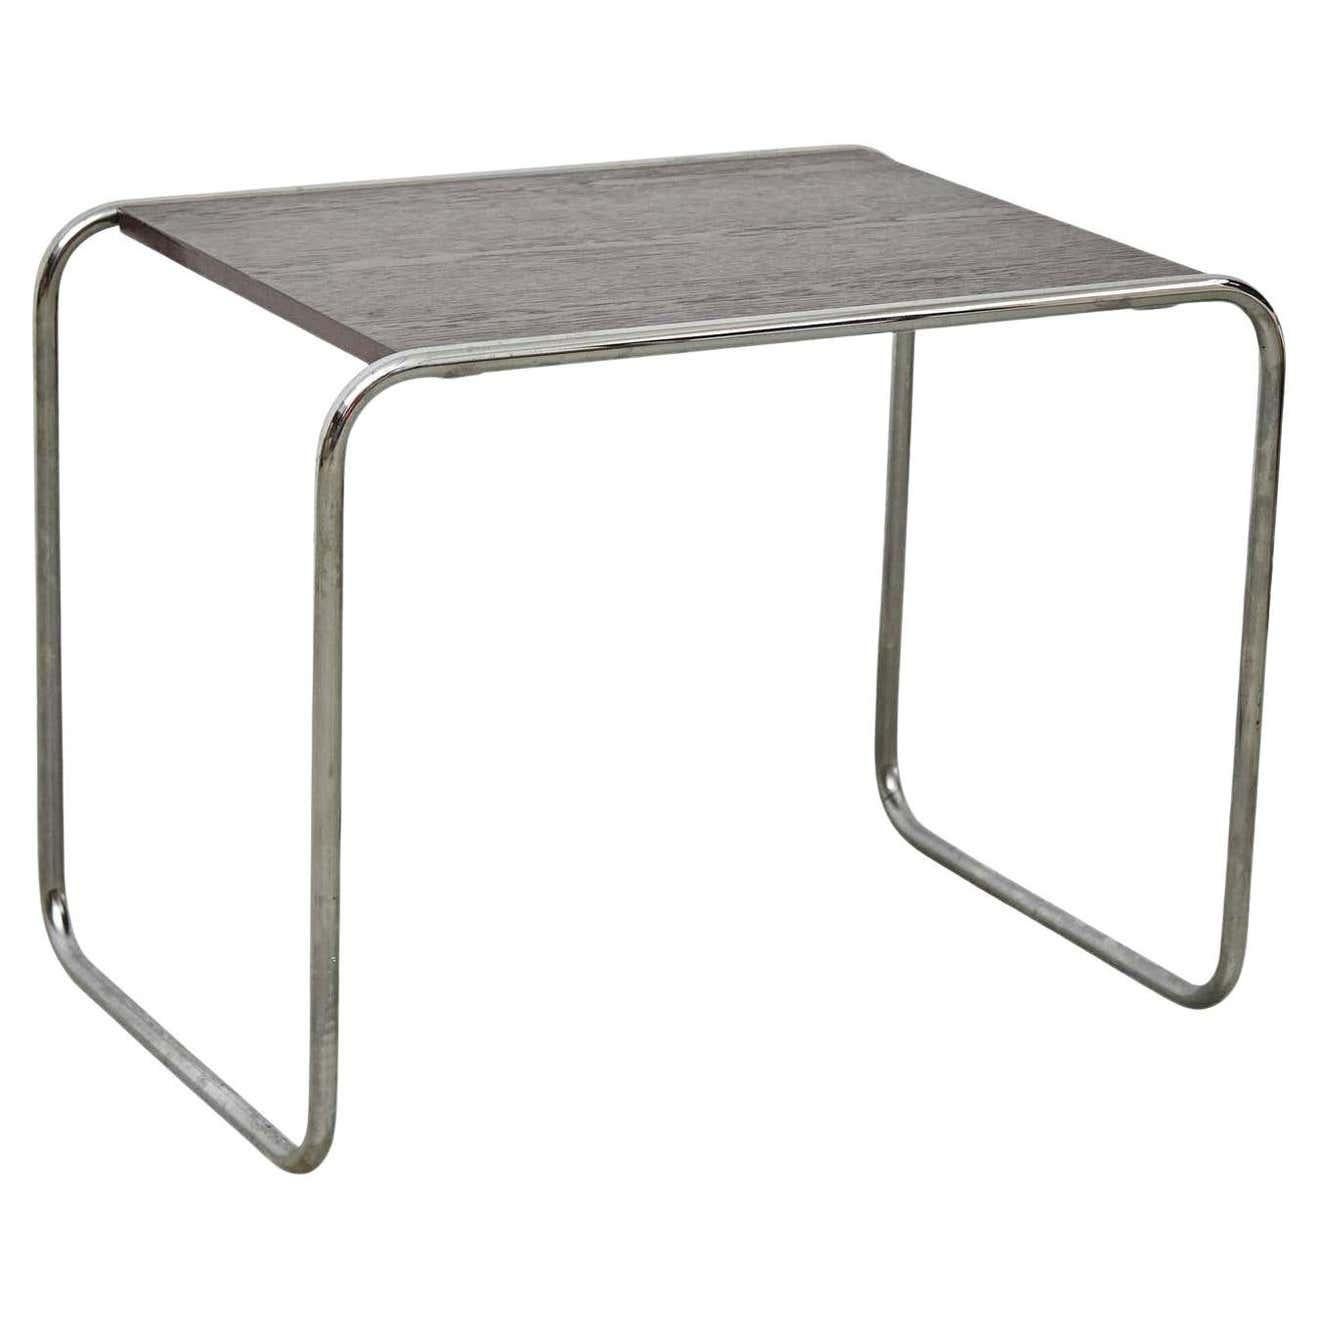 Marcel Breuer Wood and Steel Table by Gavina, circa 1960 For Sale 4